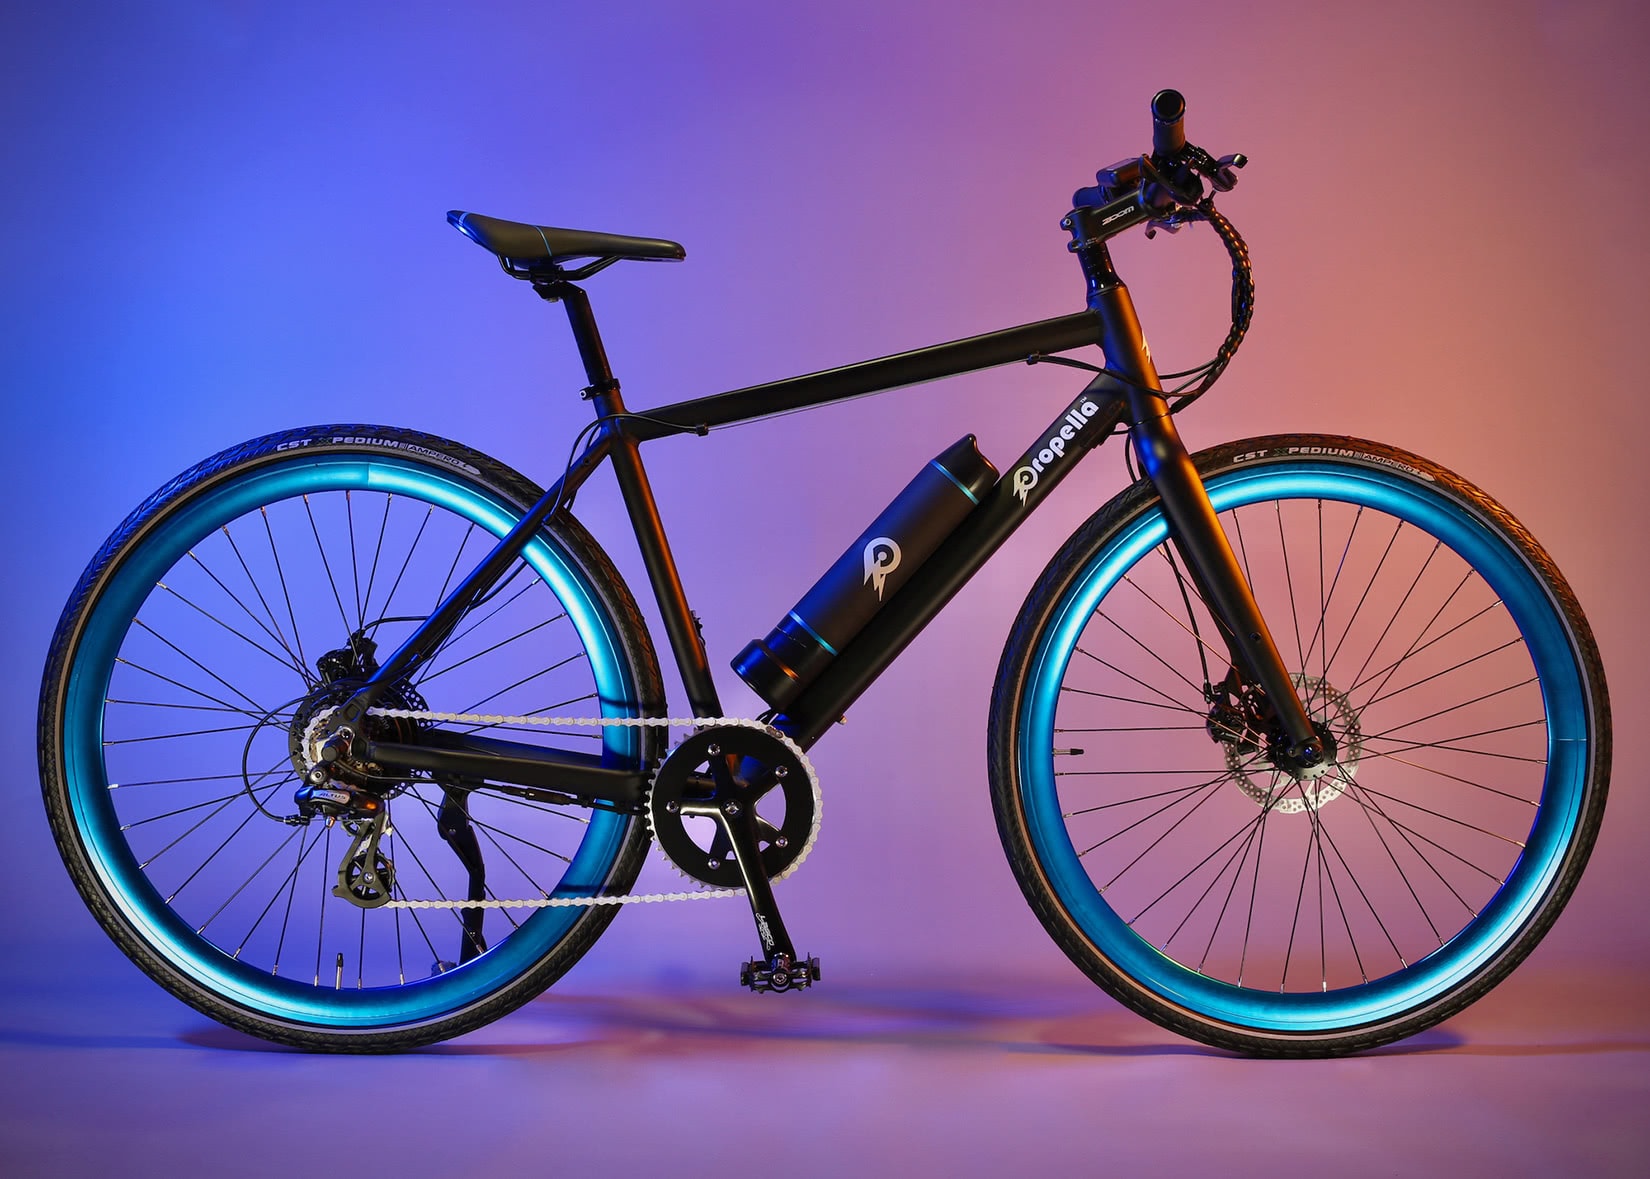 propella electric bike 7-speed review - Luxe Digital